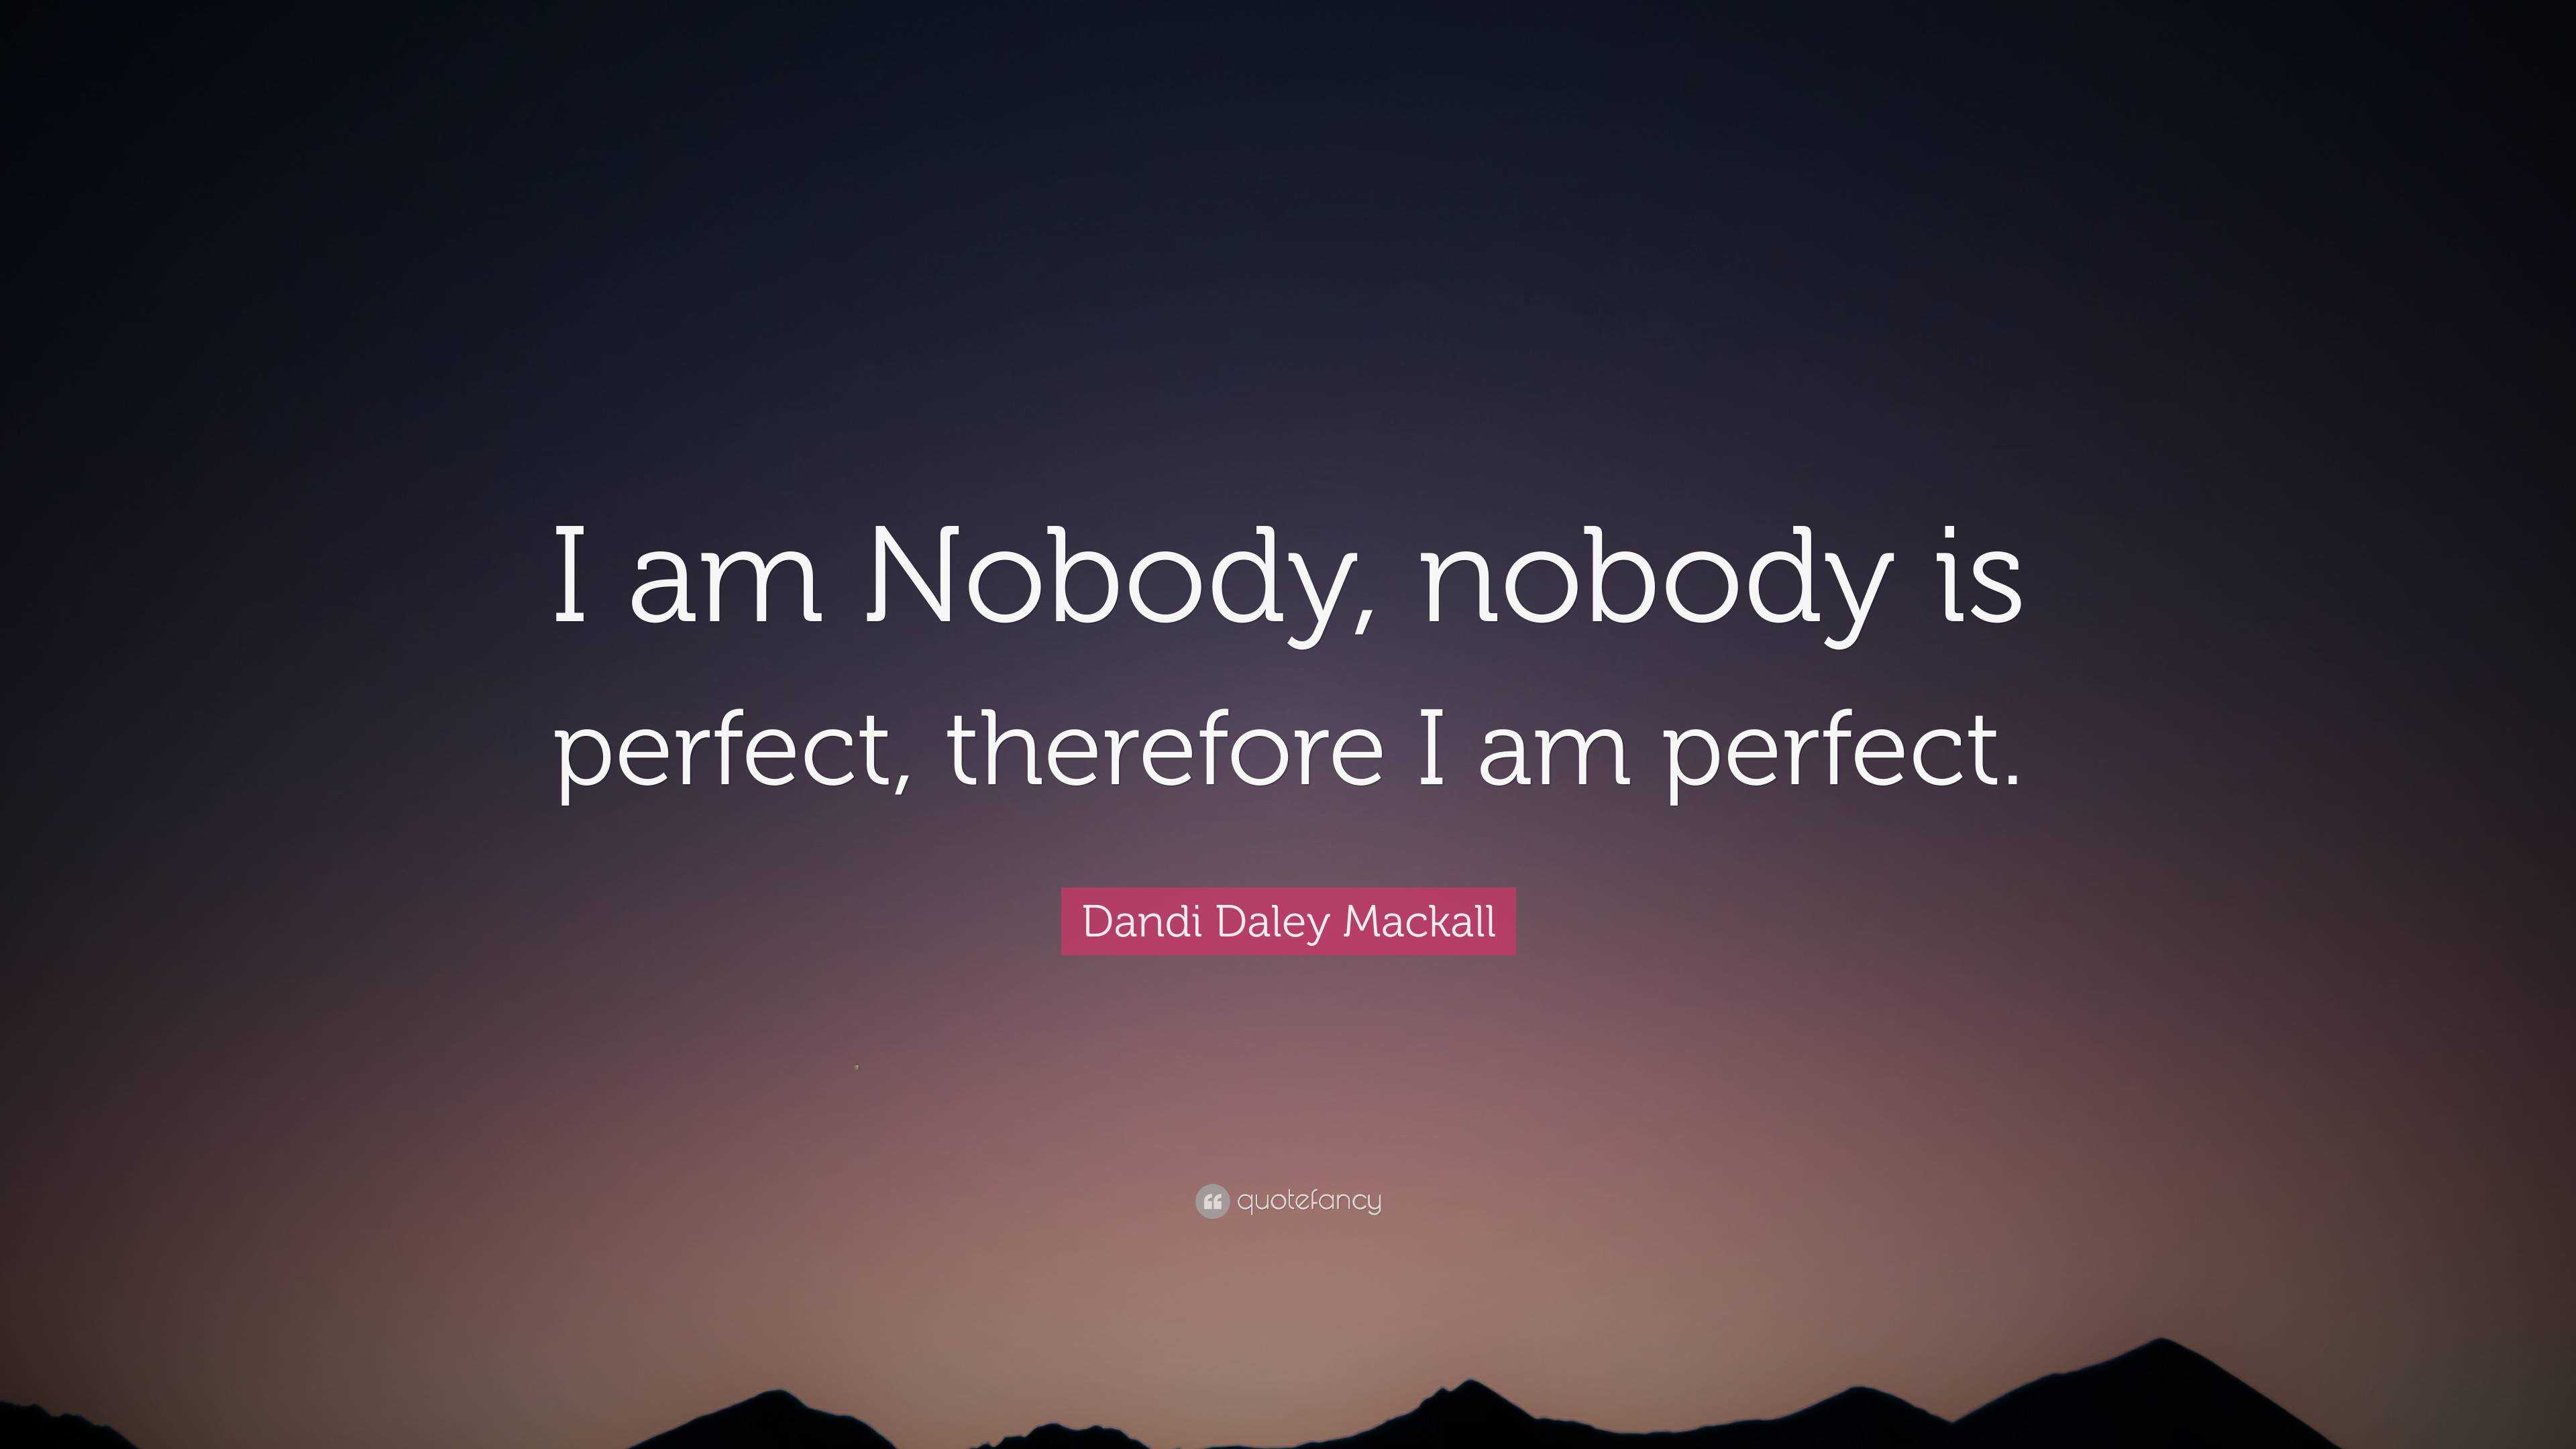 Dandi Daley Mackall Quote: “I am Nobody, nobody is perfect, therefore I ...